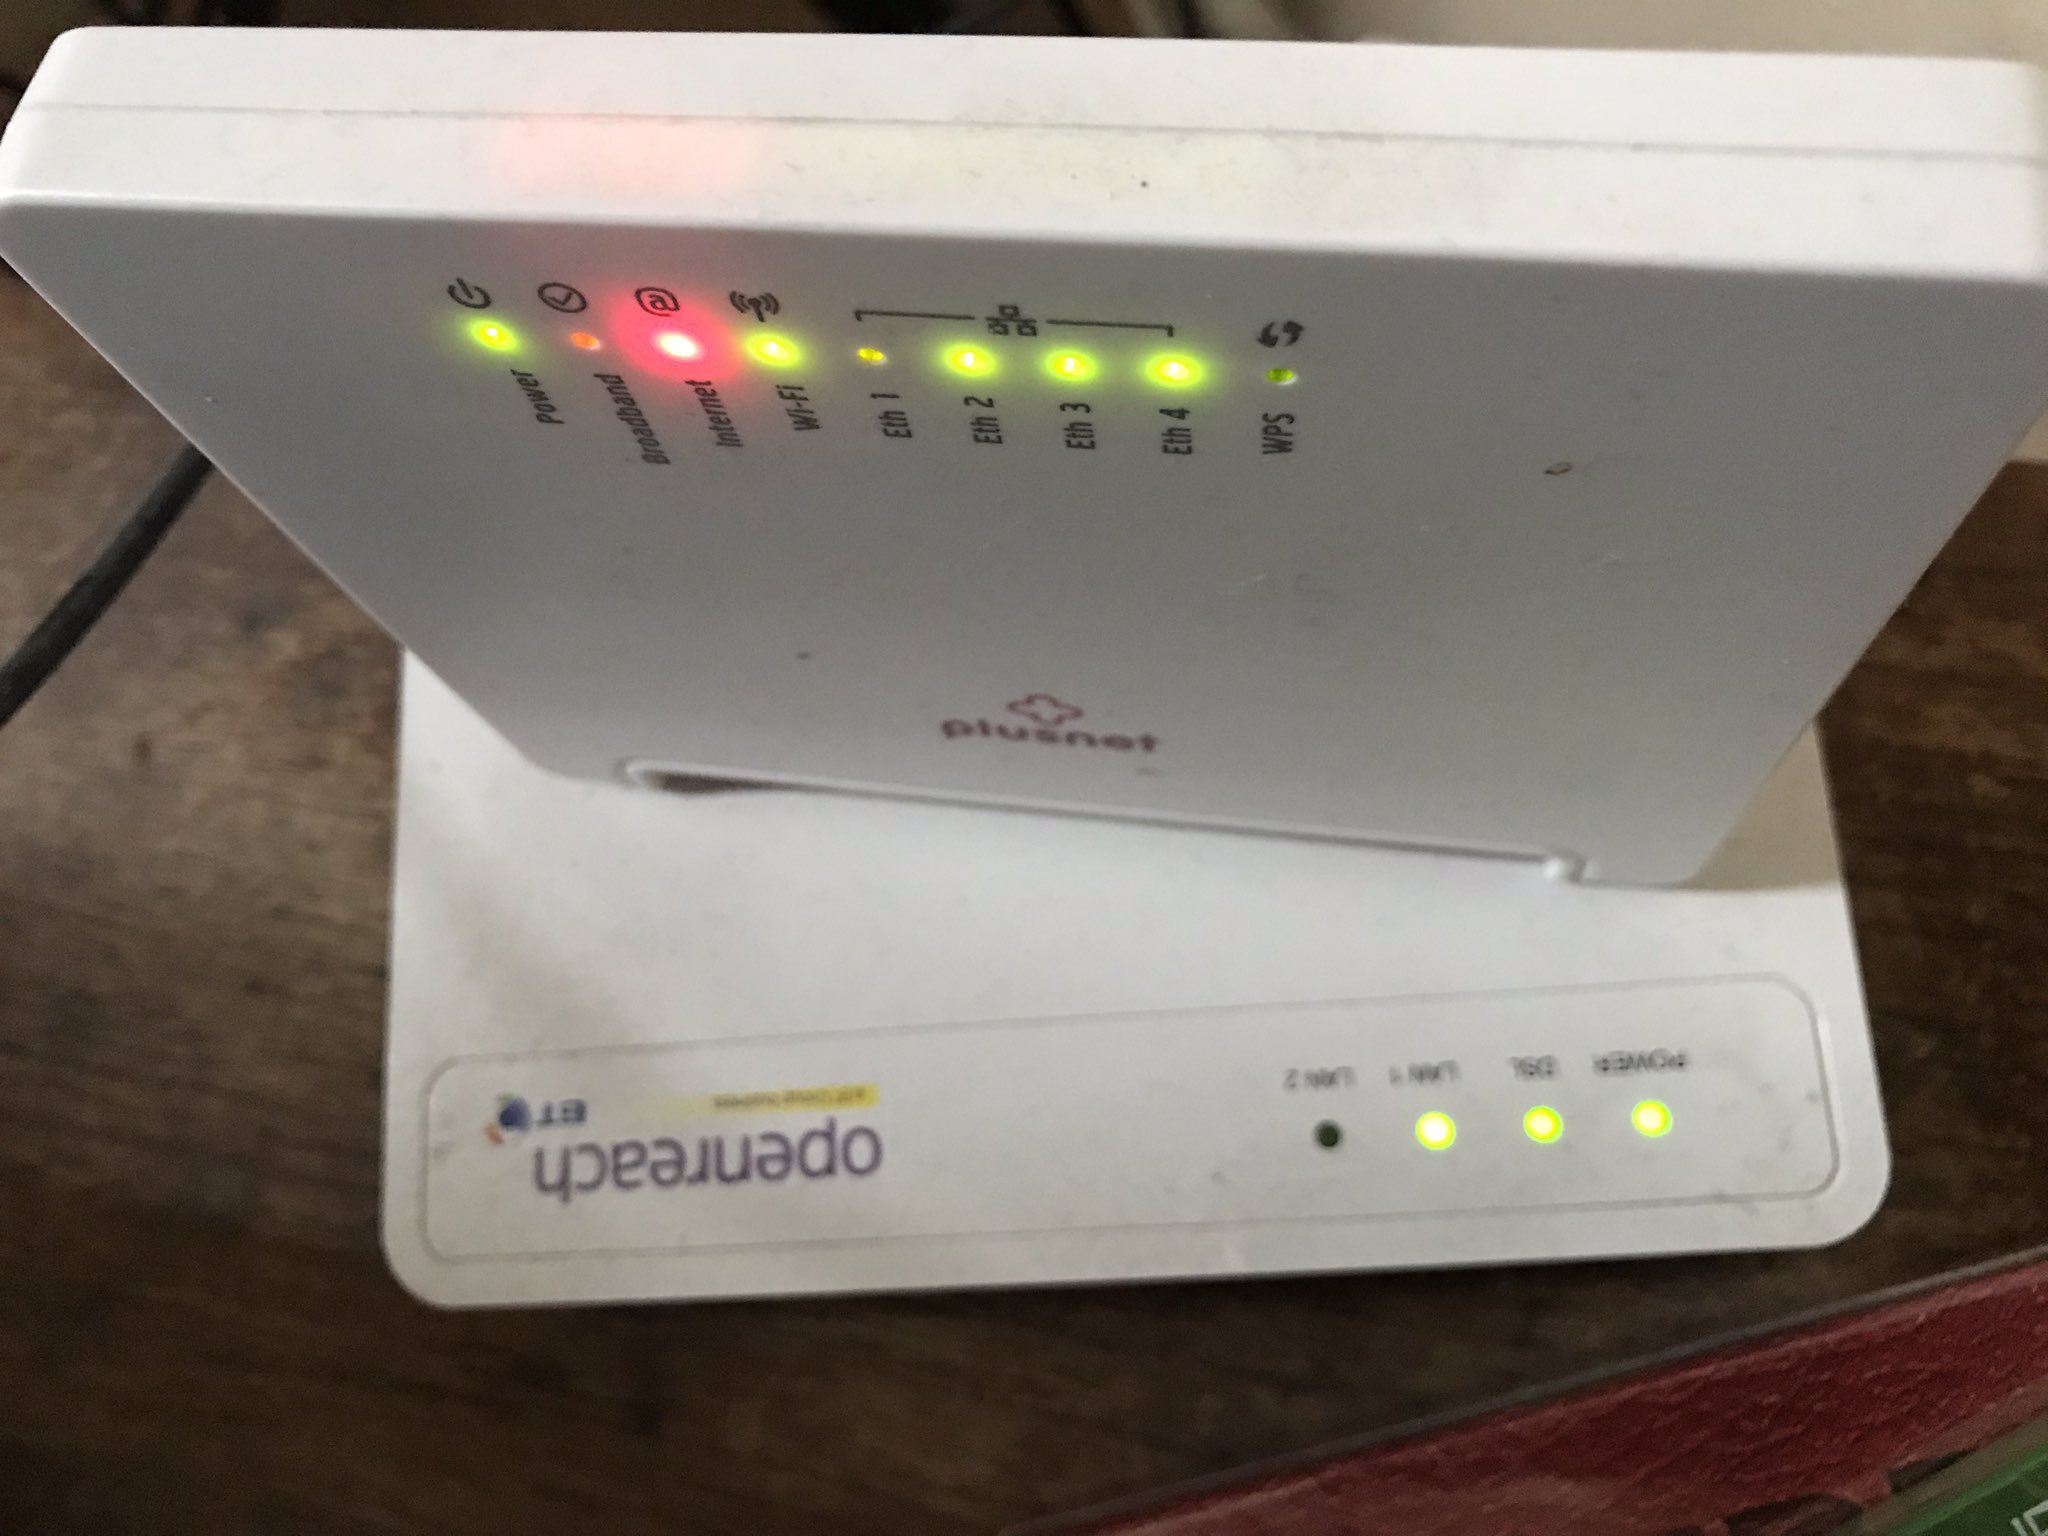 Klinik oplukker spektrum Fran Ber on Twitter: "Hi guys, our internet has been not working since last  night. This morning we restarted the router a few times but no changes. The Internet  light is fixed